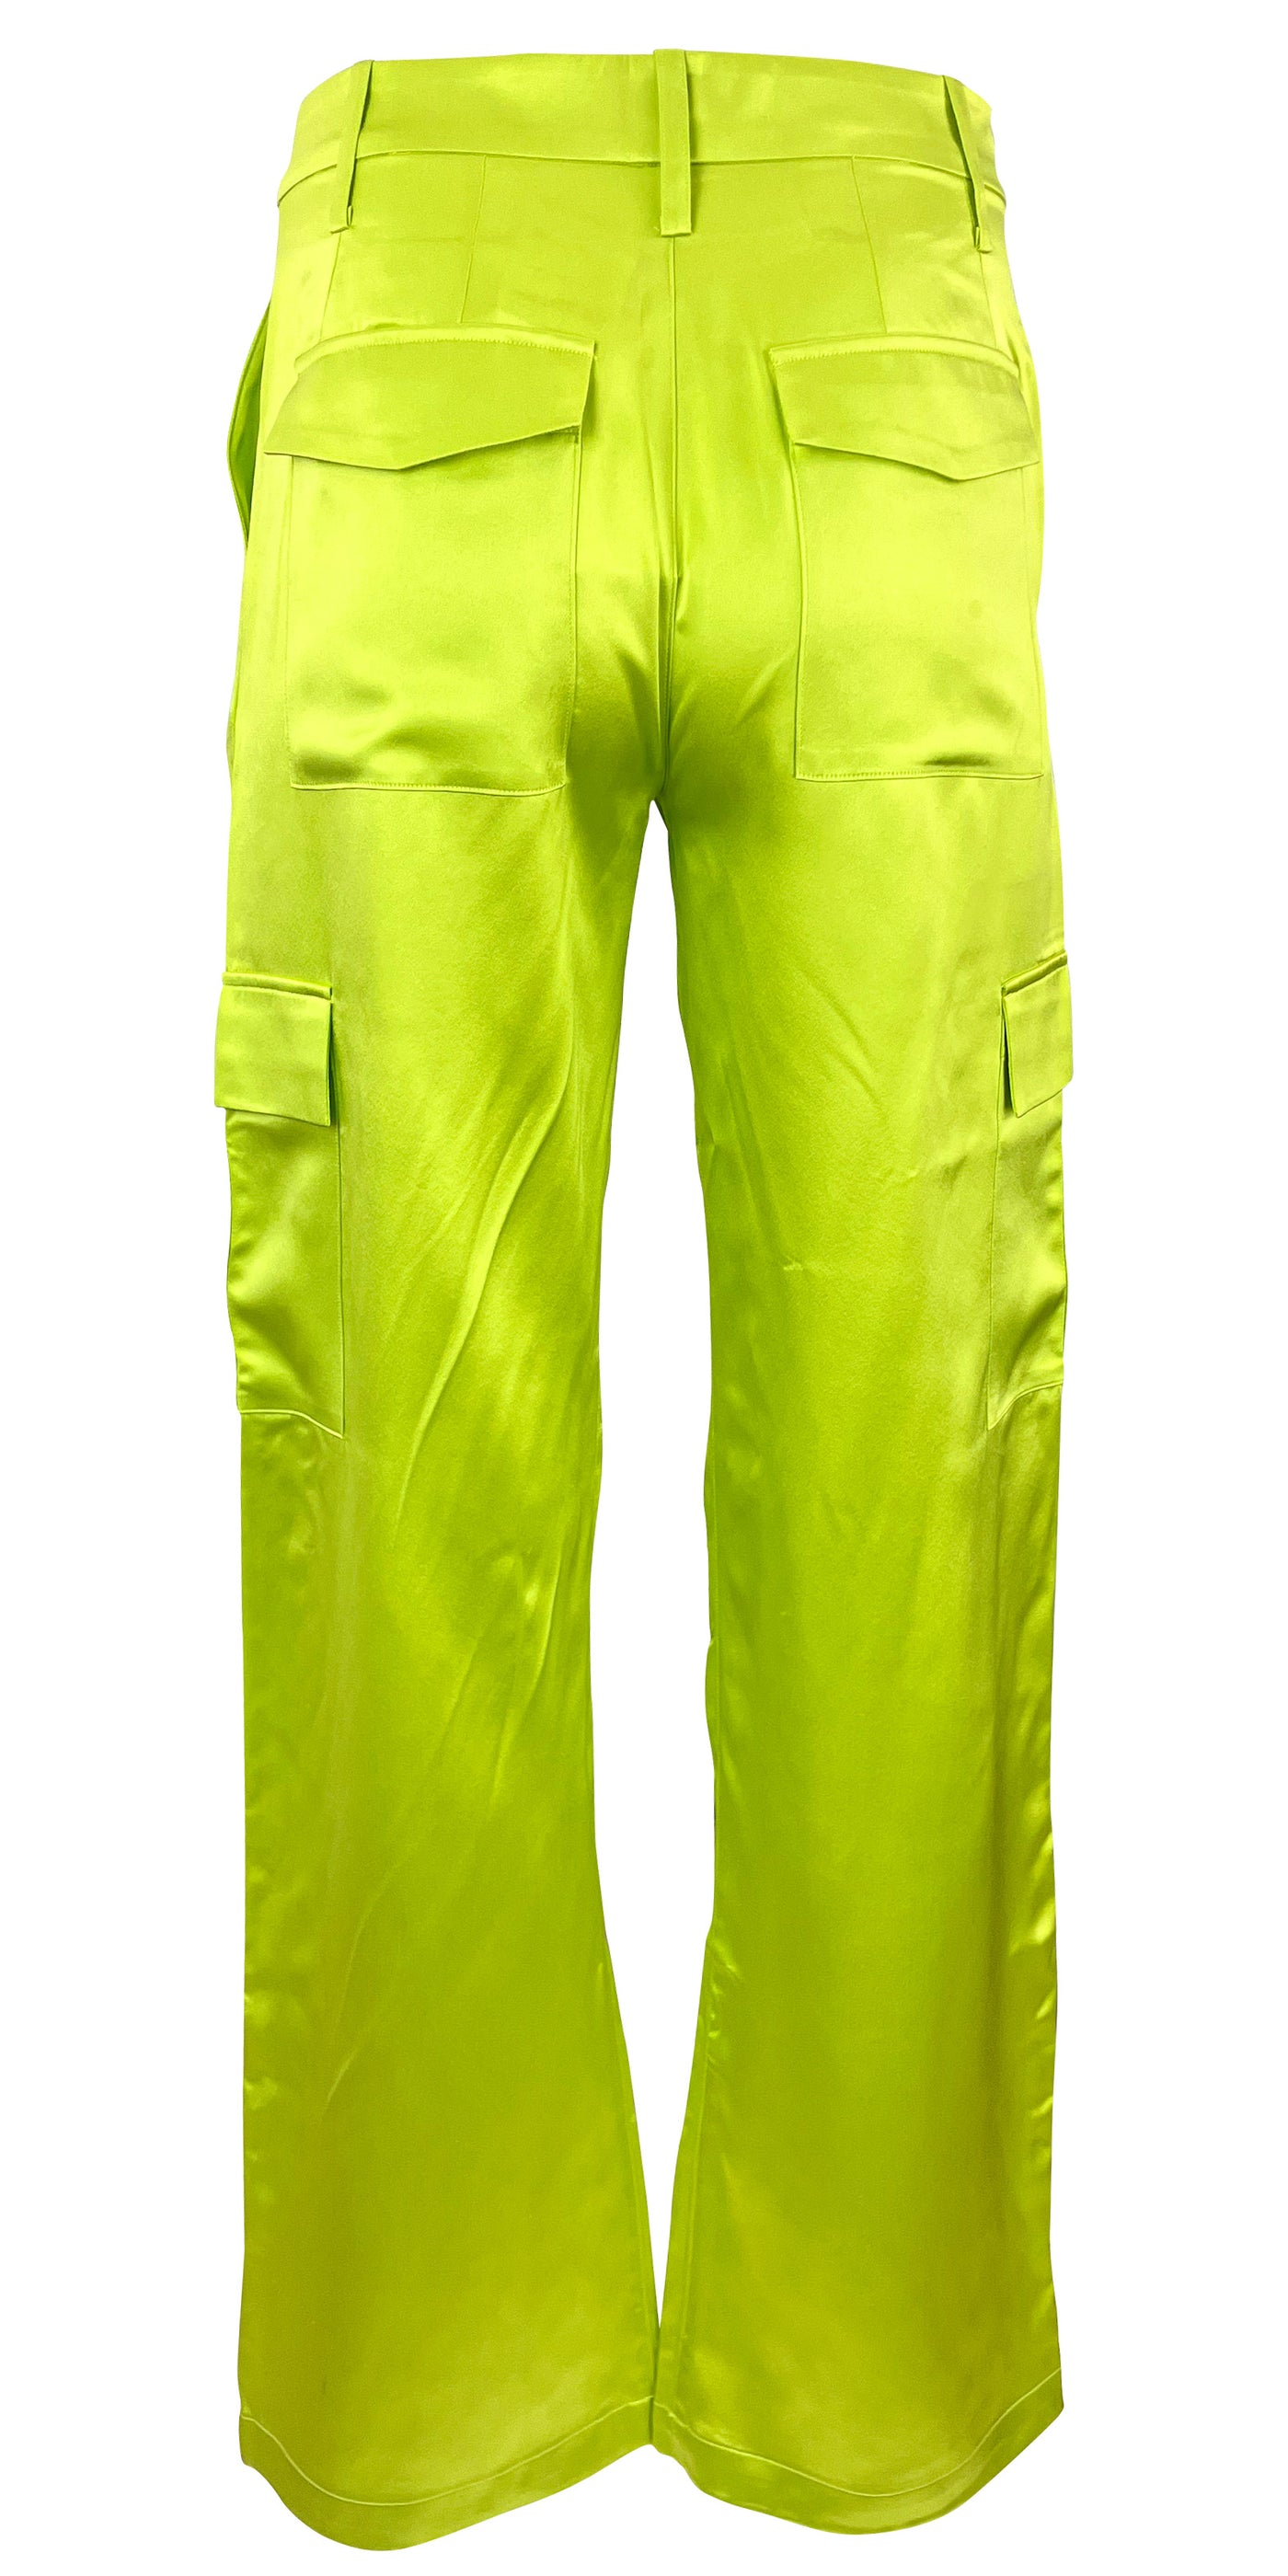 SPRWMN Silk Cargo Pants in Electric Chartreuse - Discounts on SPRWMN at UAL